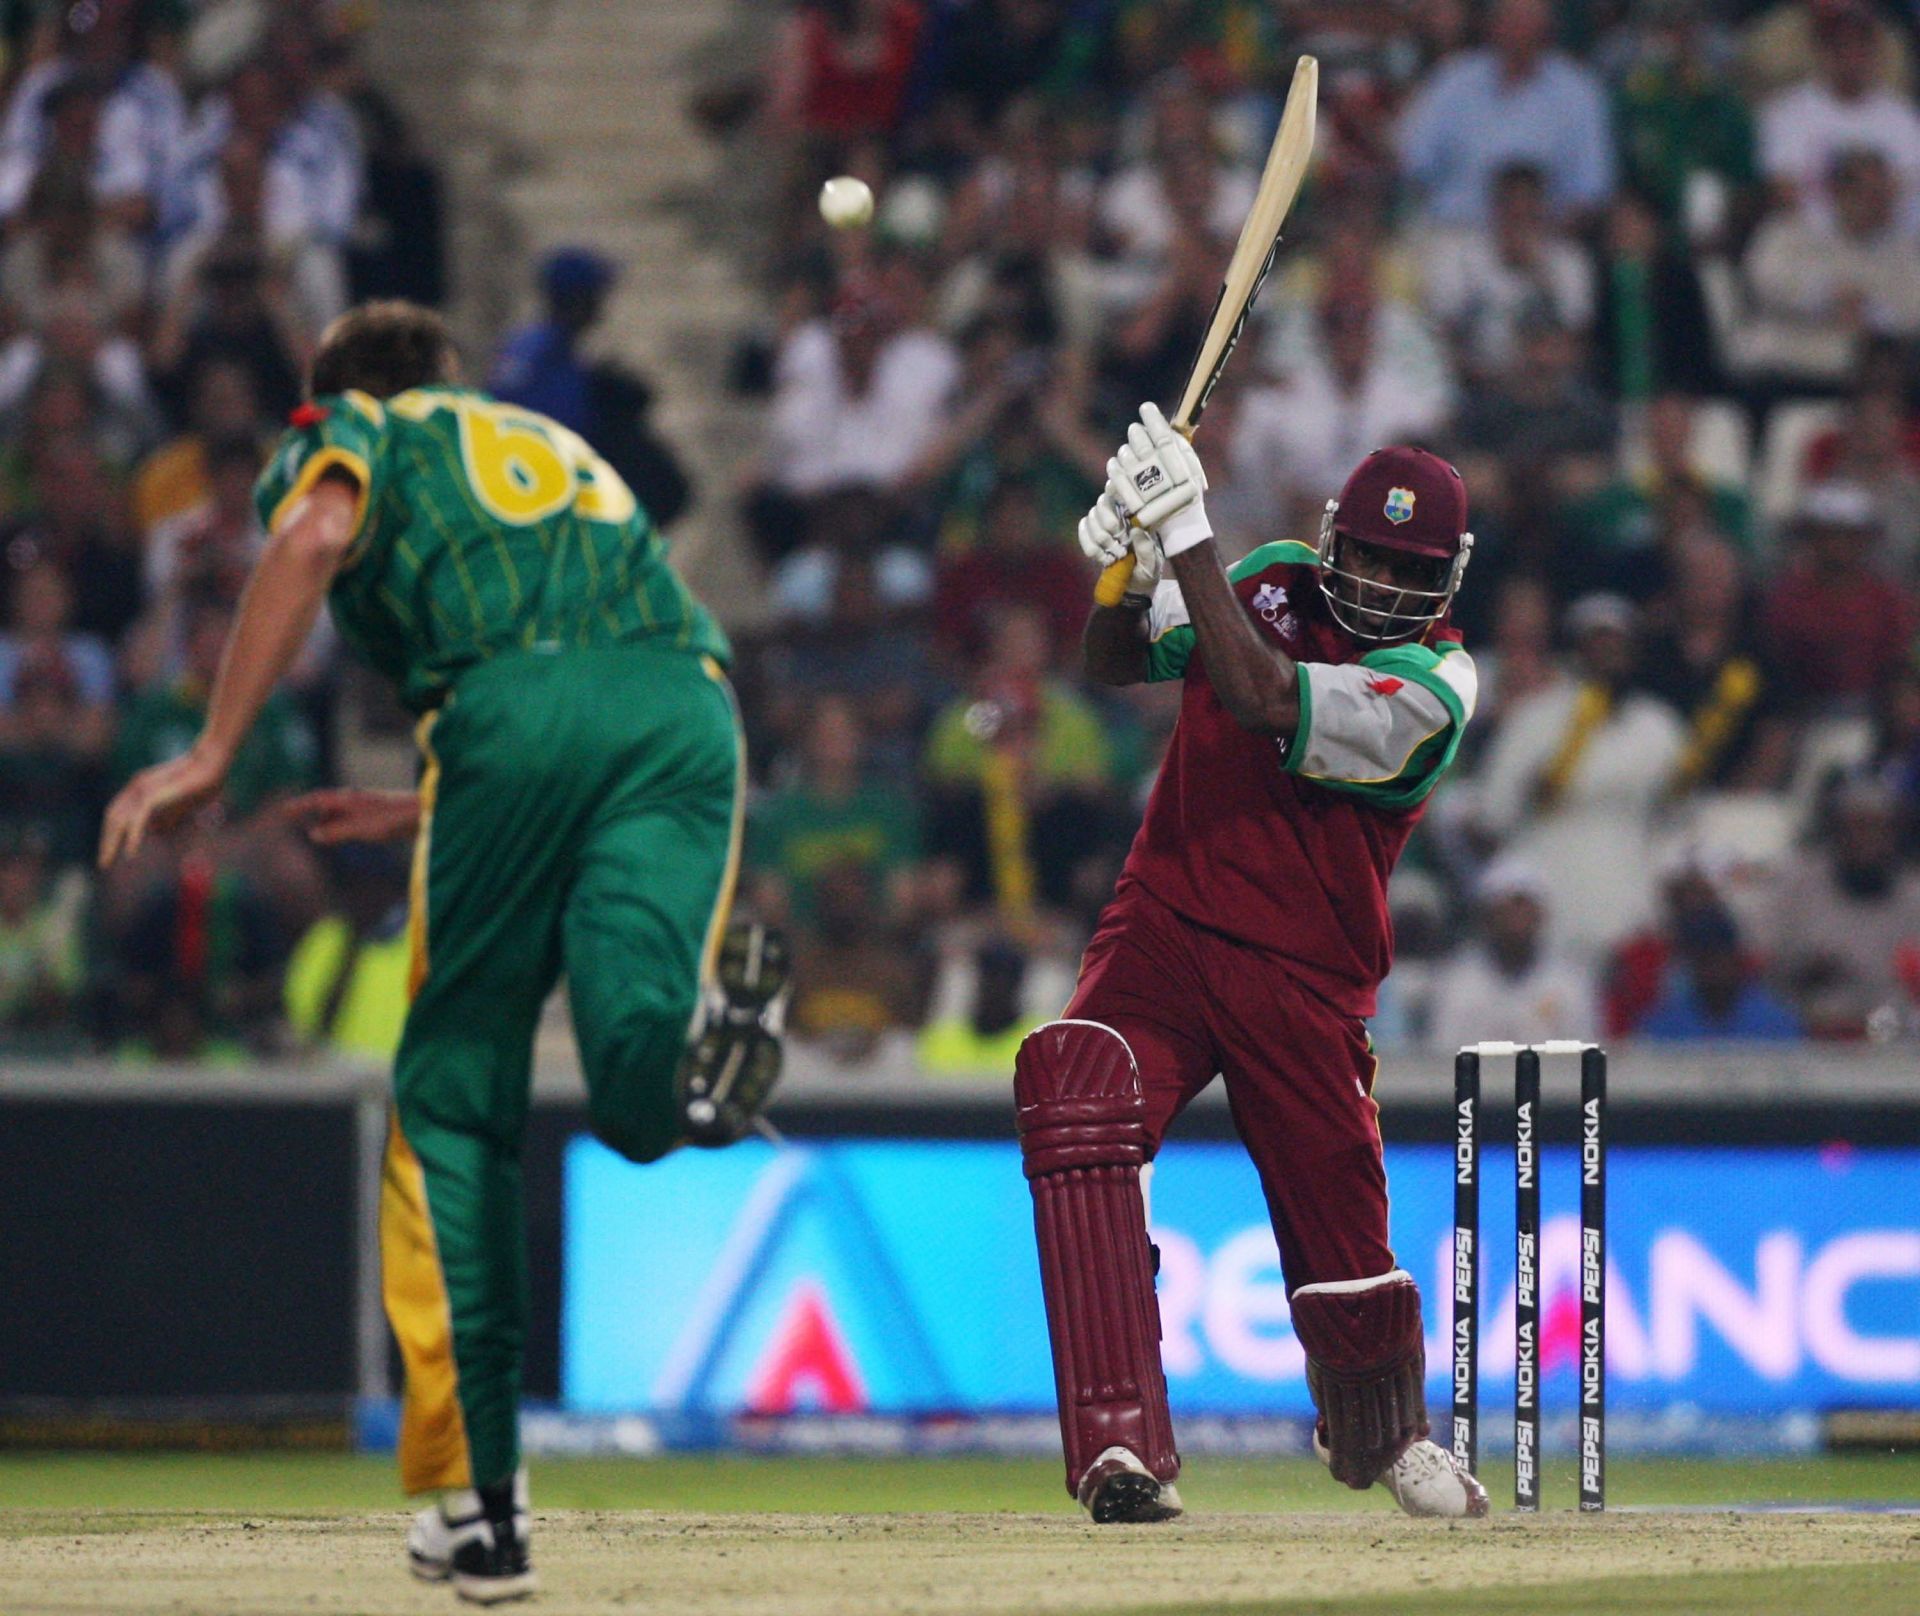 Gayle kicked off the new tournament in his trademark style, bludgeoning sixes for fun